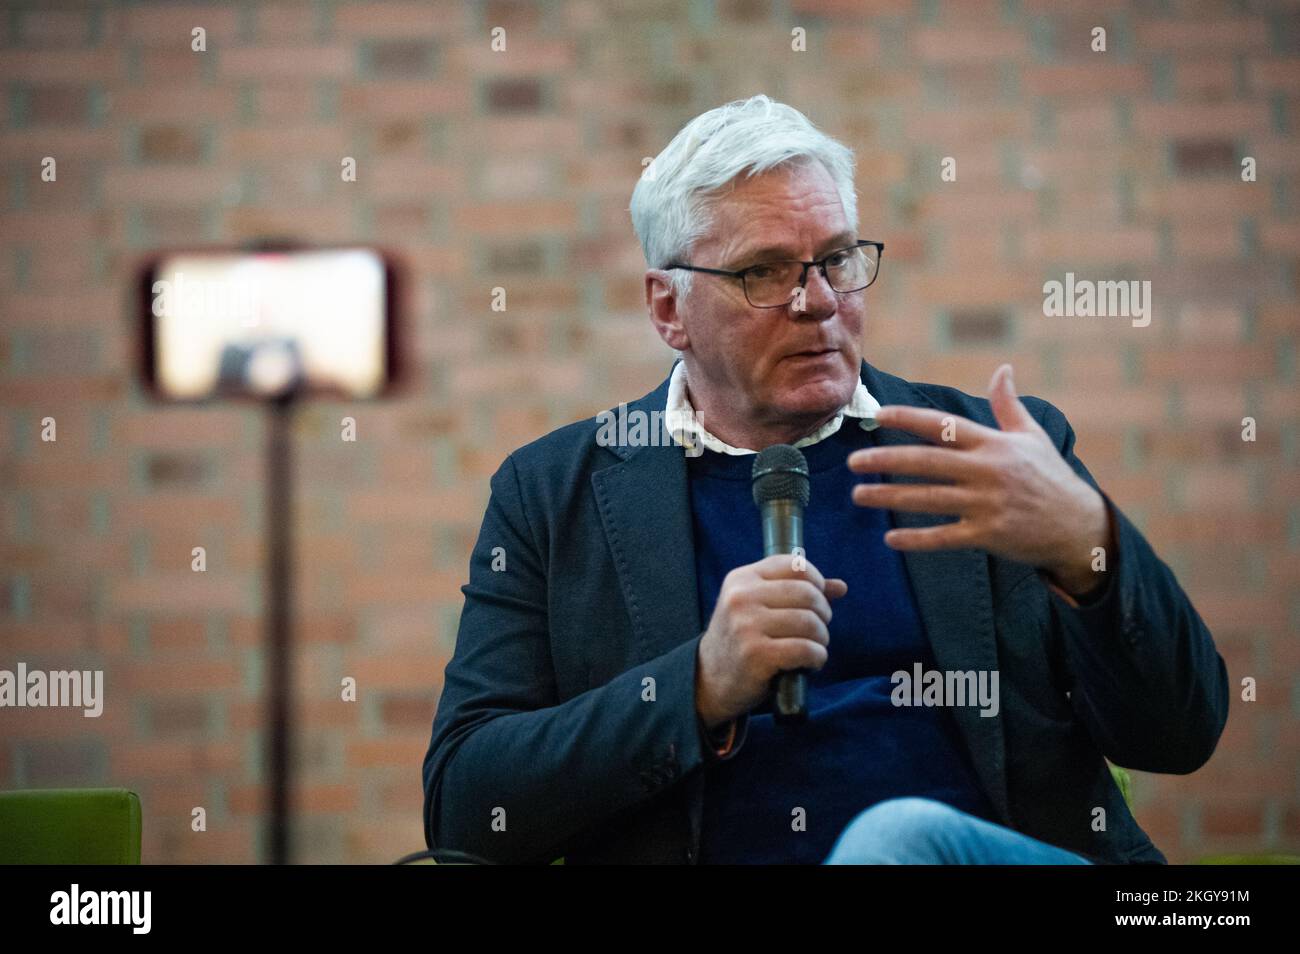 Kristinn Hrafnsson, chief editor of WikiLeaks speaks during a discussion on freedom of expression at Colombia's National University, in Bogota, Colomb Stock Photo